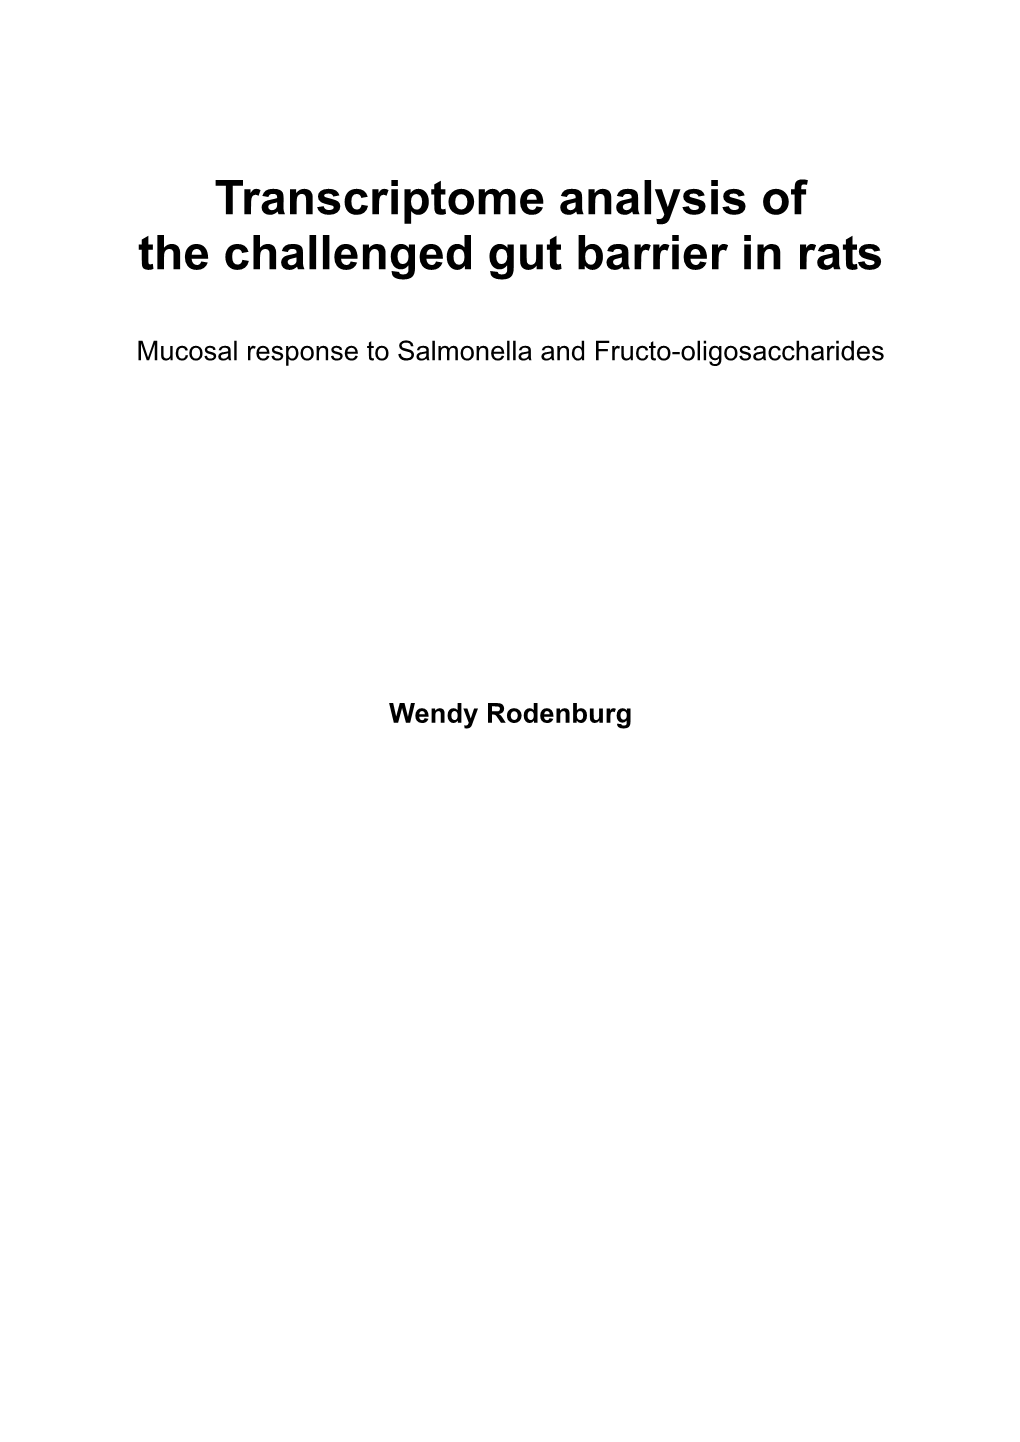 Transcriptome Analysis of the Challenged Gut Barrier in Rats